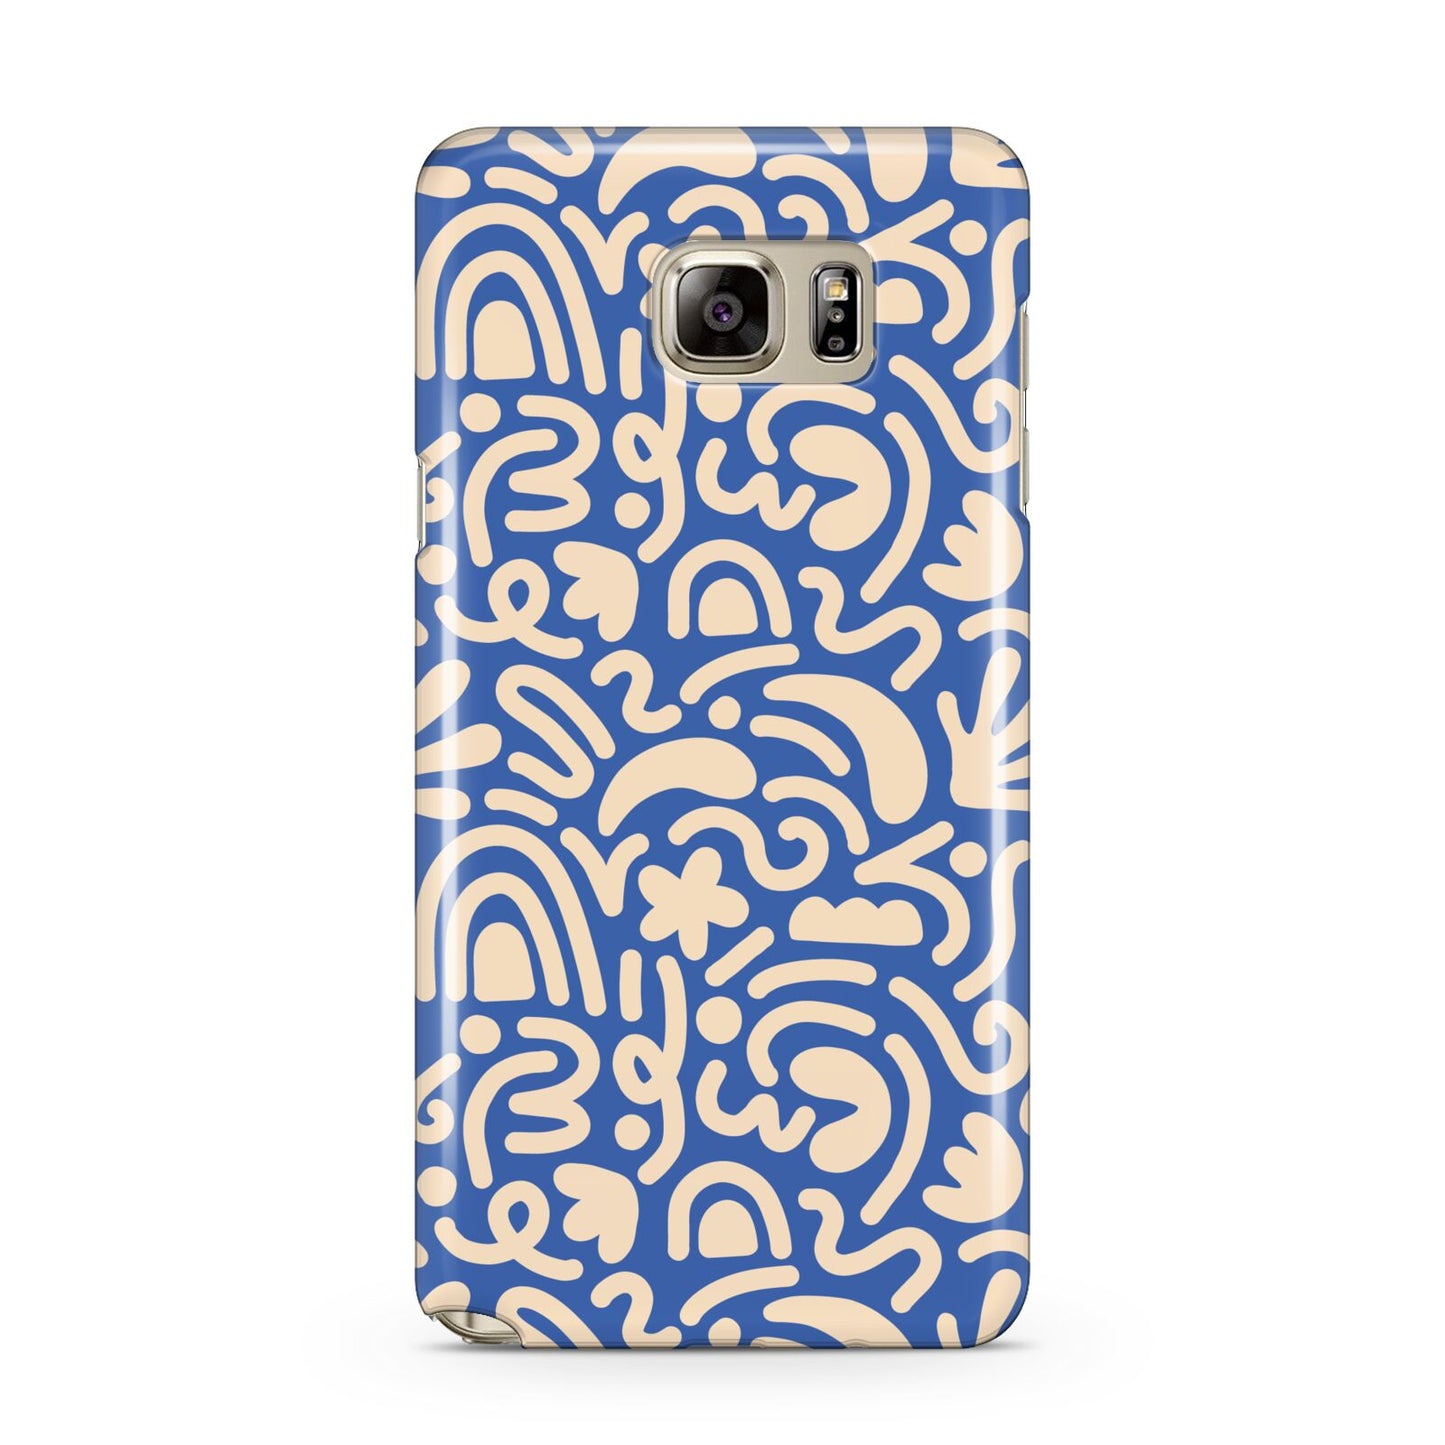 Abstract Samsung Galaxy Note 5 Case